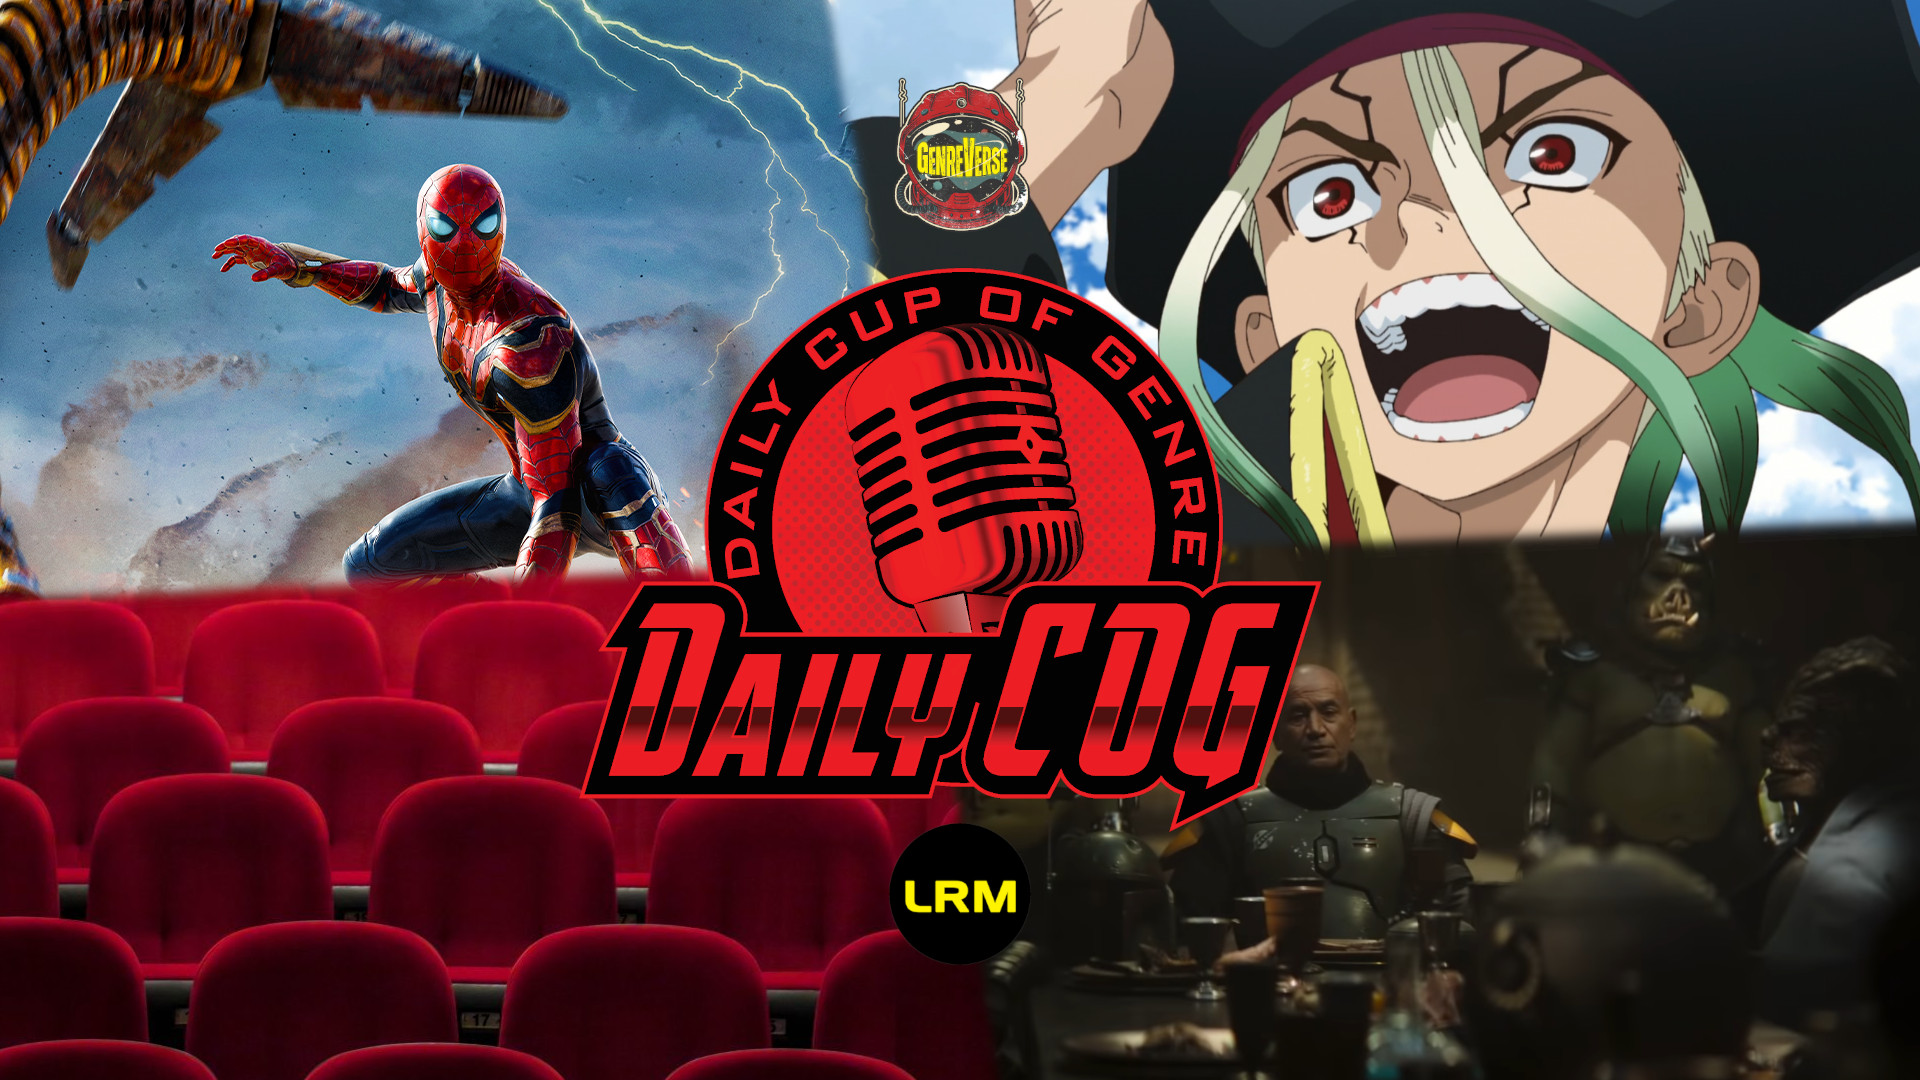 Spider-Man: No Way Home Box Office, Book Of Boba Fett “Authority” Spot Reaction, & Dr. STONE S3 Announcement | Daily COG